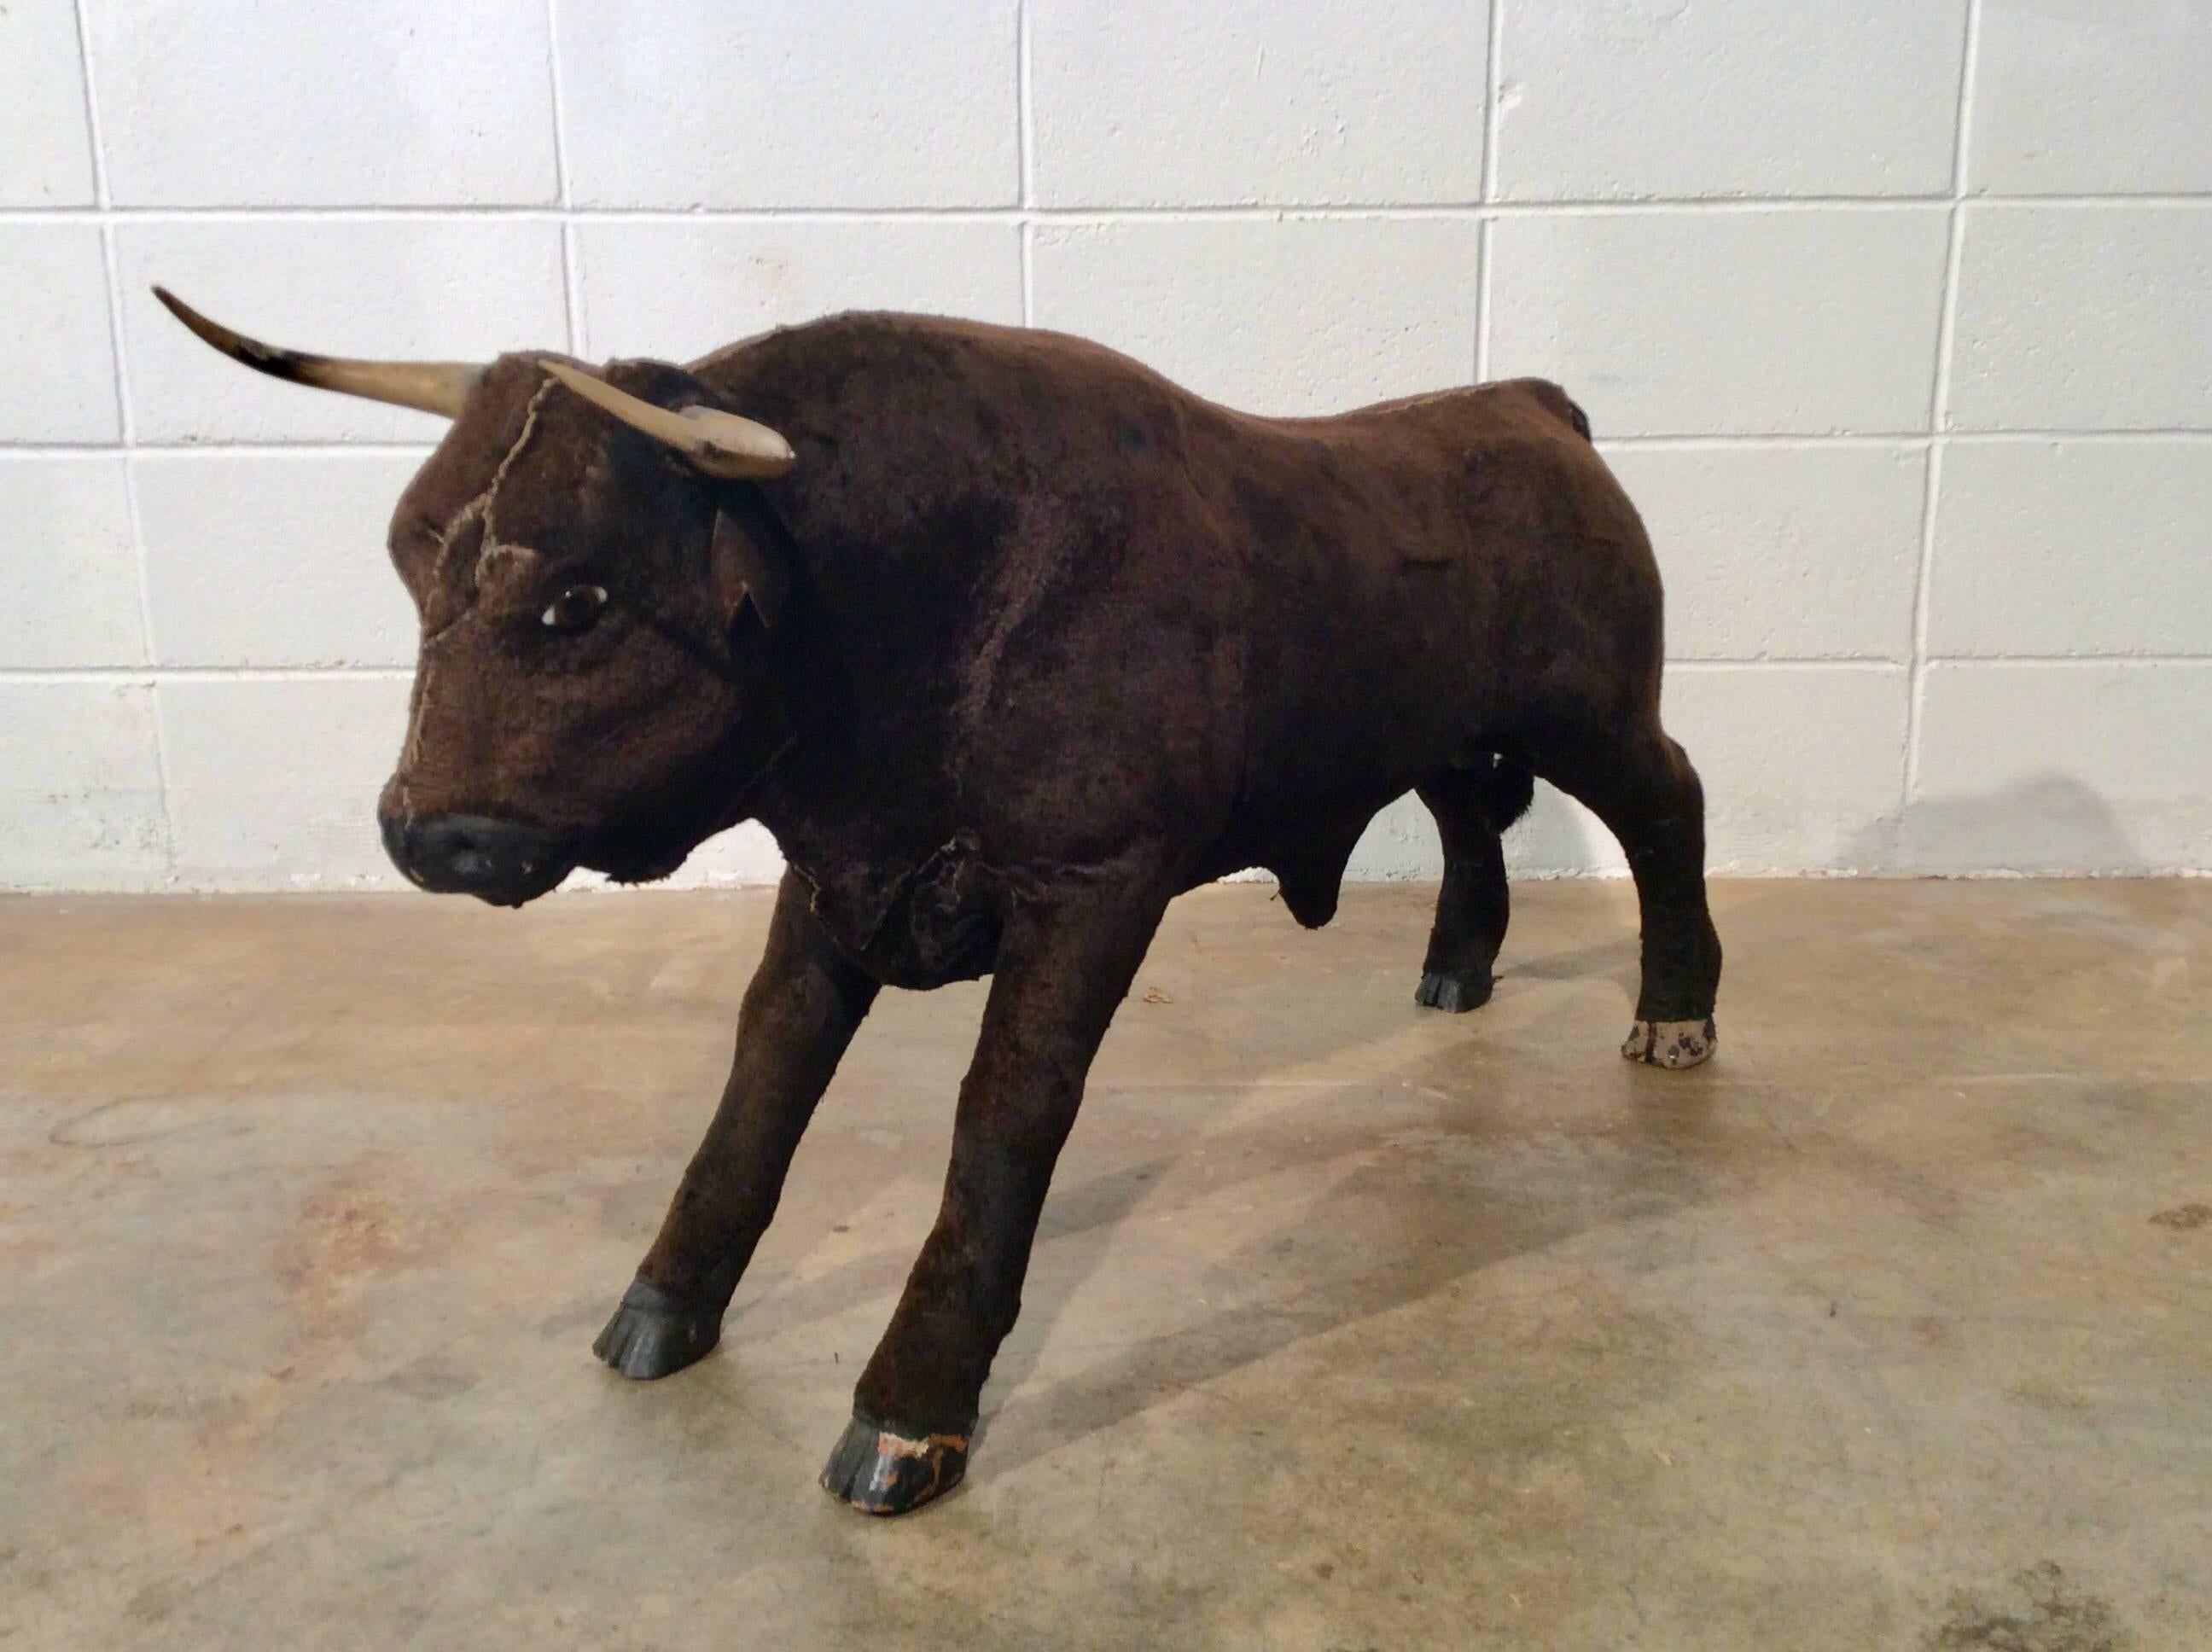 Very unique and quirky pair of handmade Folk Art bull sculptures. The bulls are very realistic and are anatomically correct. They feature glass eyes, plastic horns, wooden feet and nose, all wrapped in what seems to be a flannel material that looks